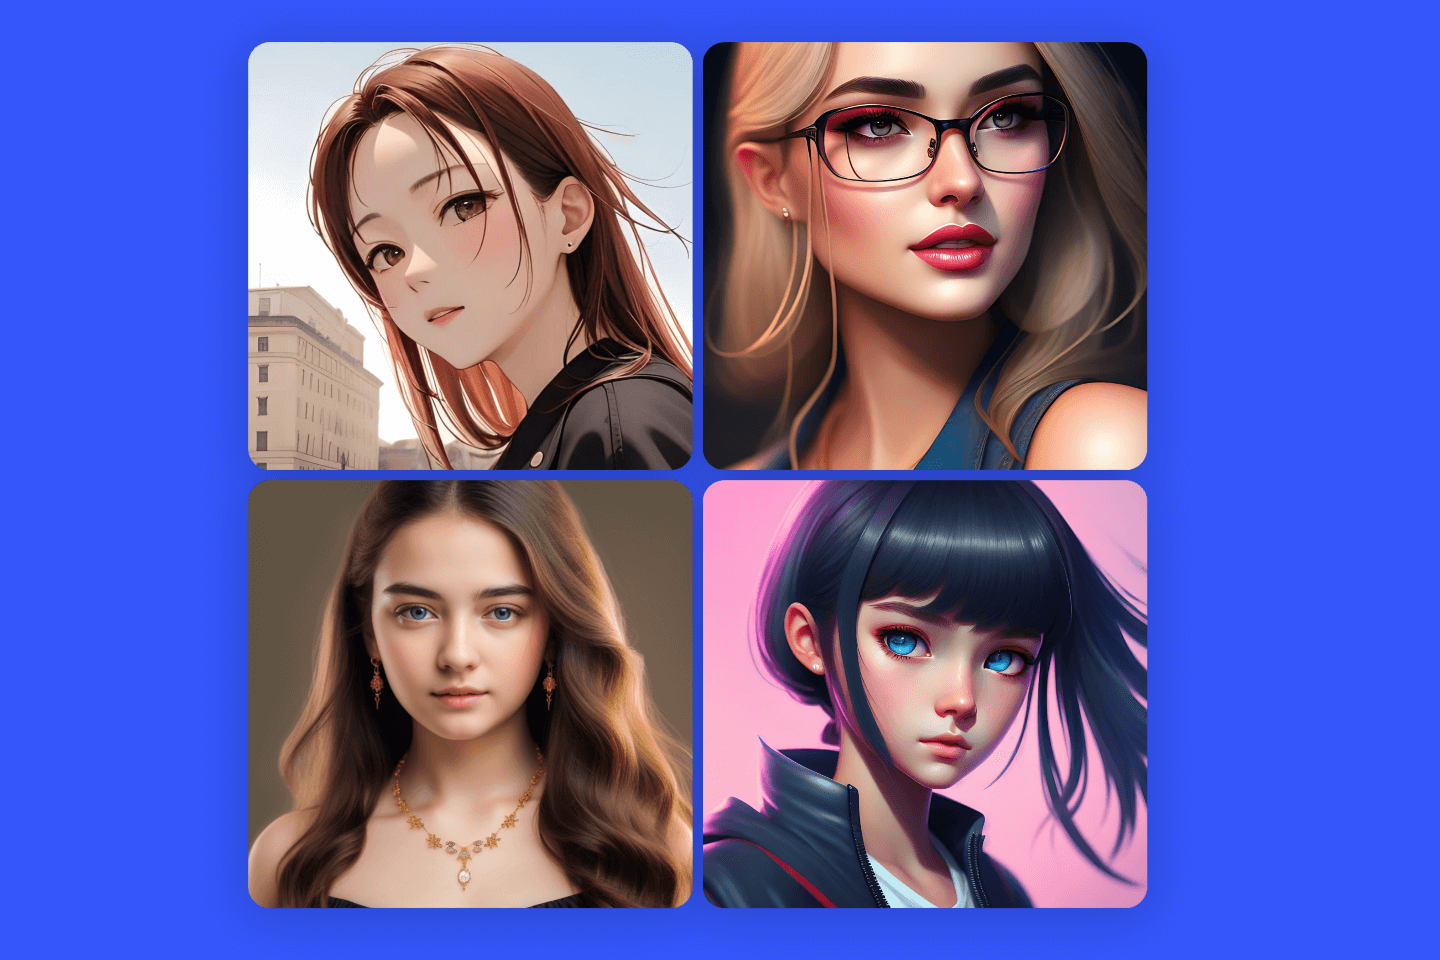 4 girl avatars in cartoon style and realistic style